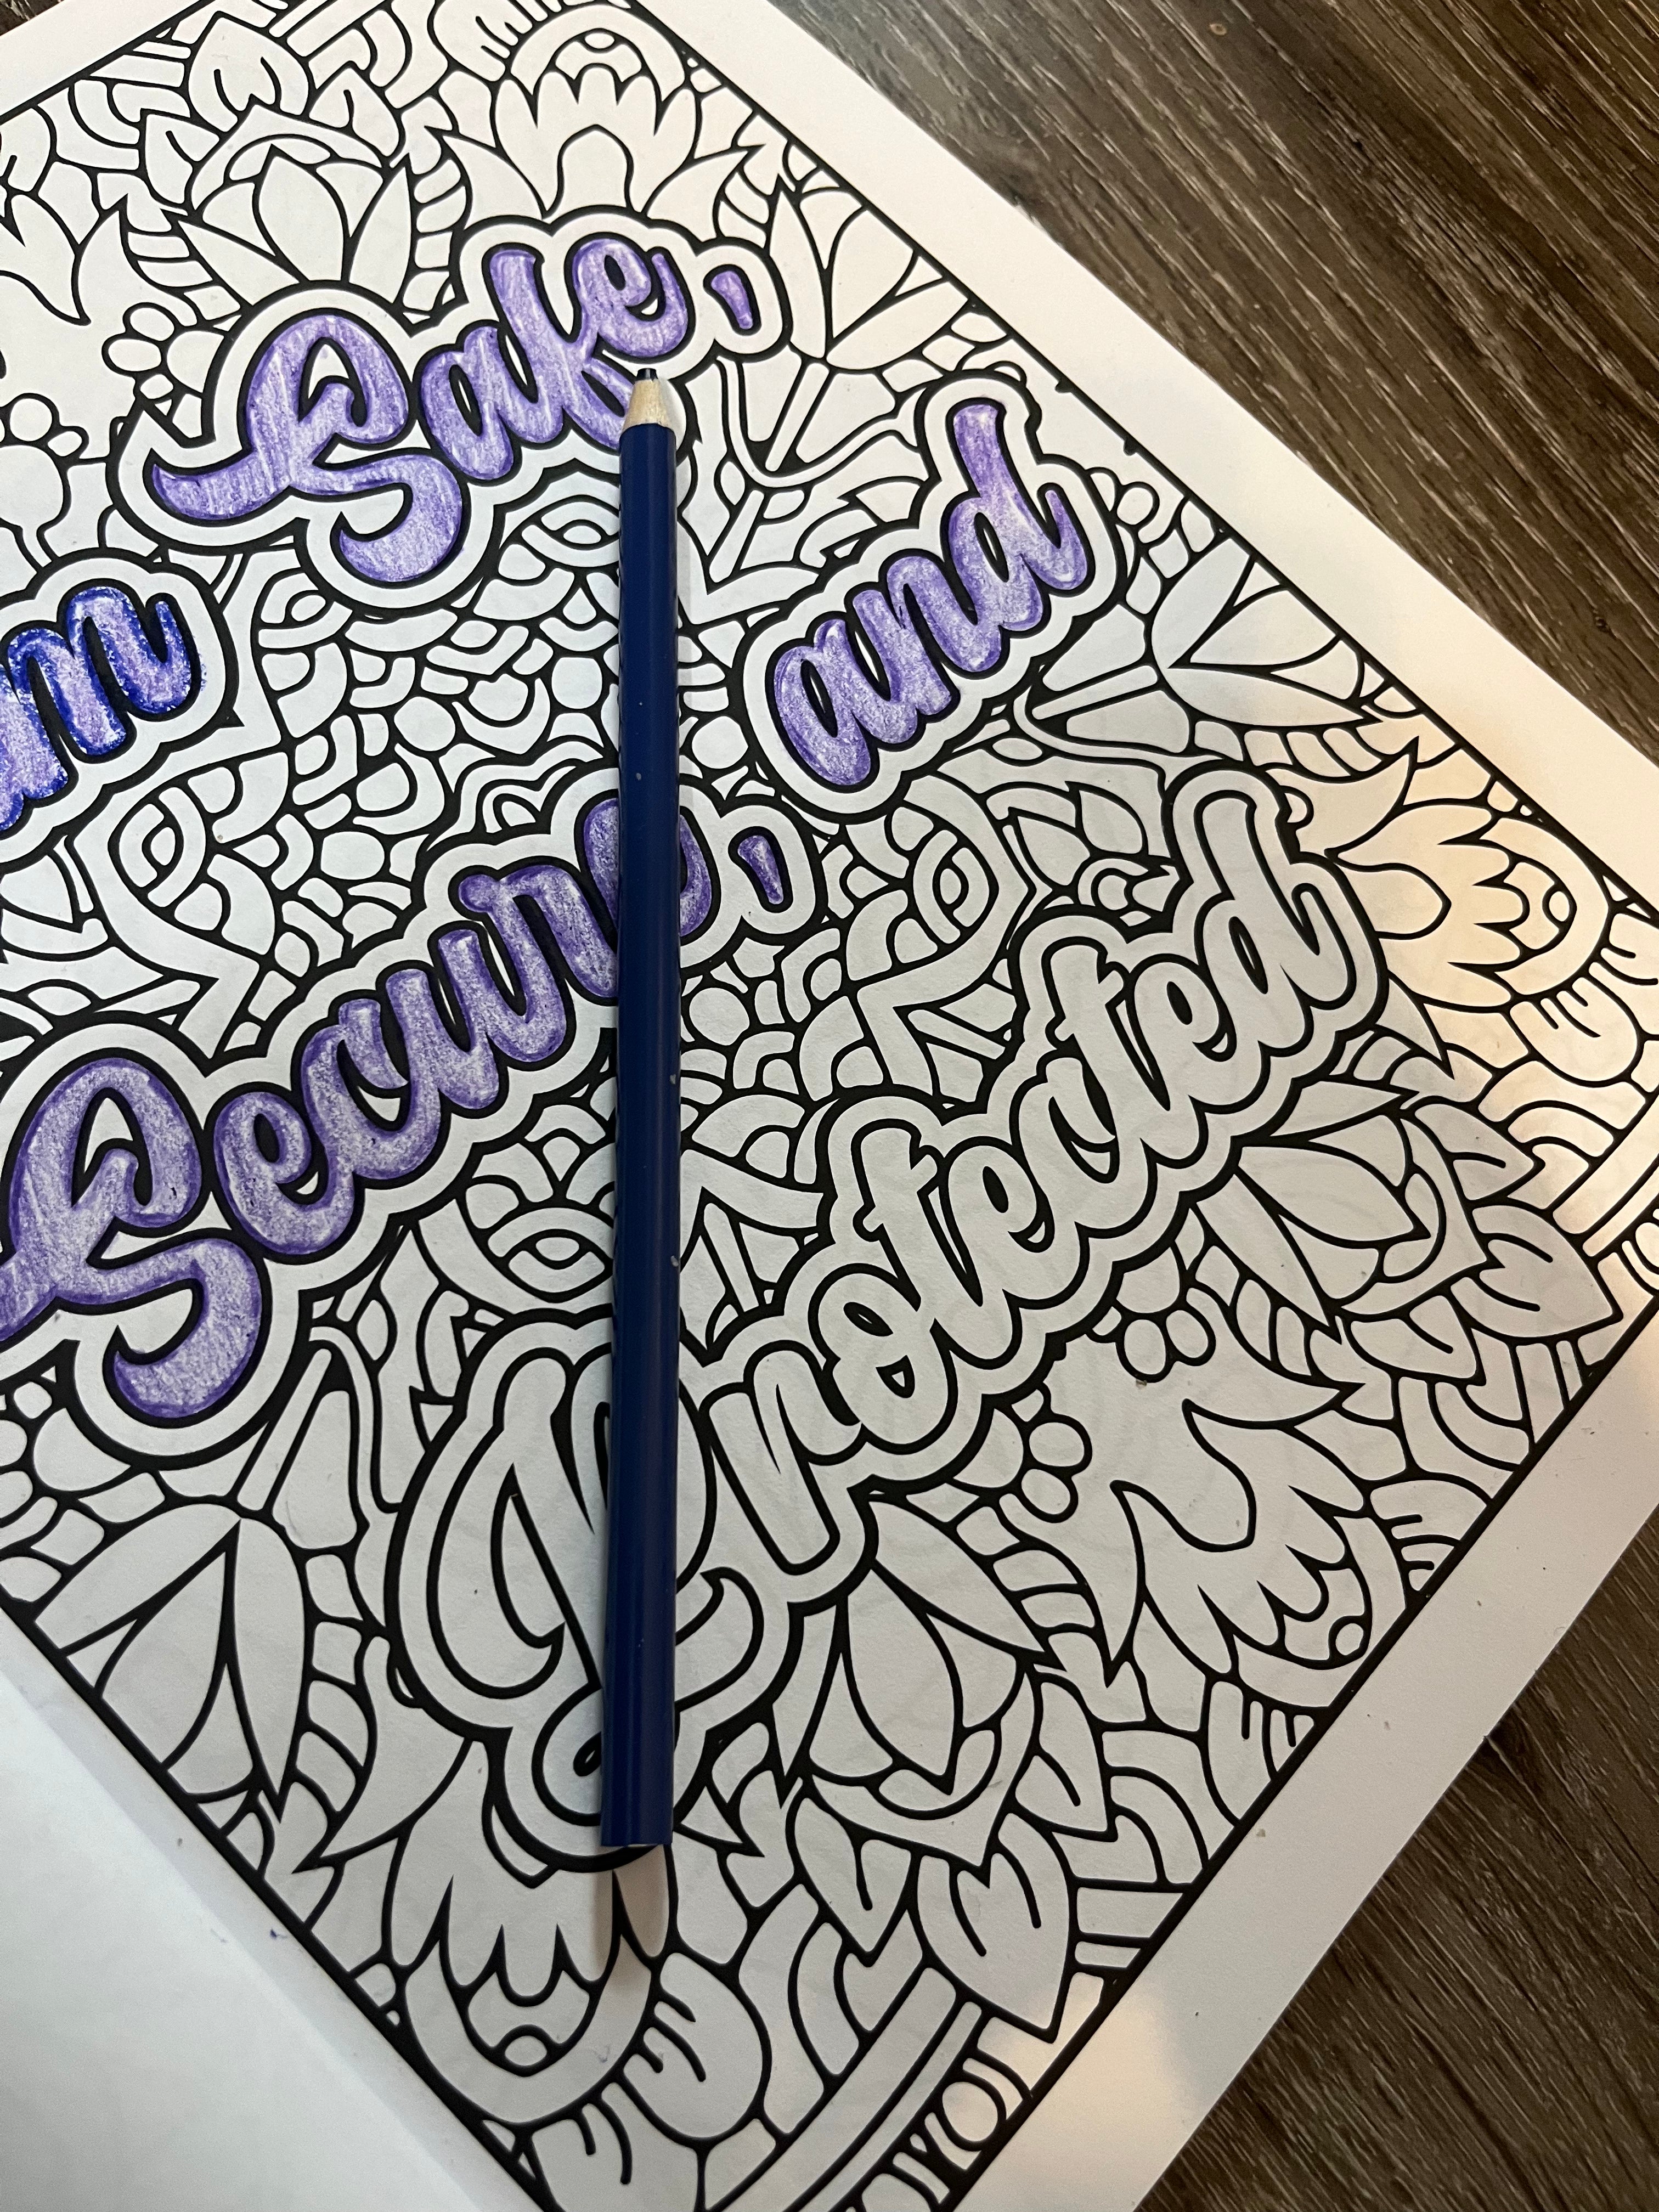 I Deserve: An Inspirational and Motivational Adult Coloring Book